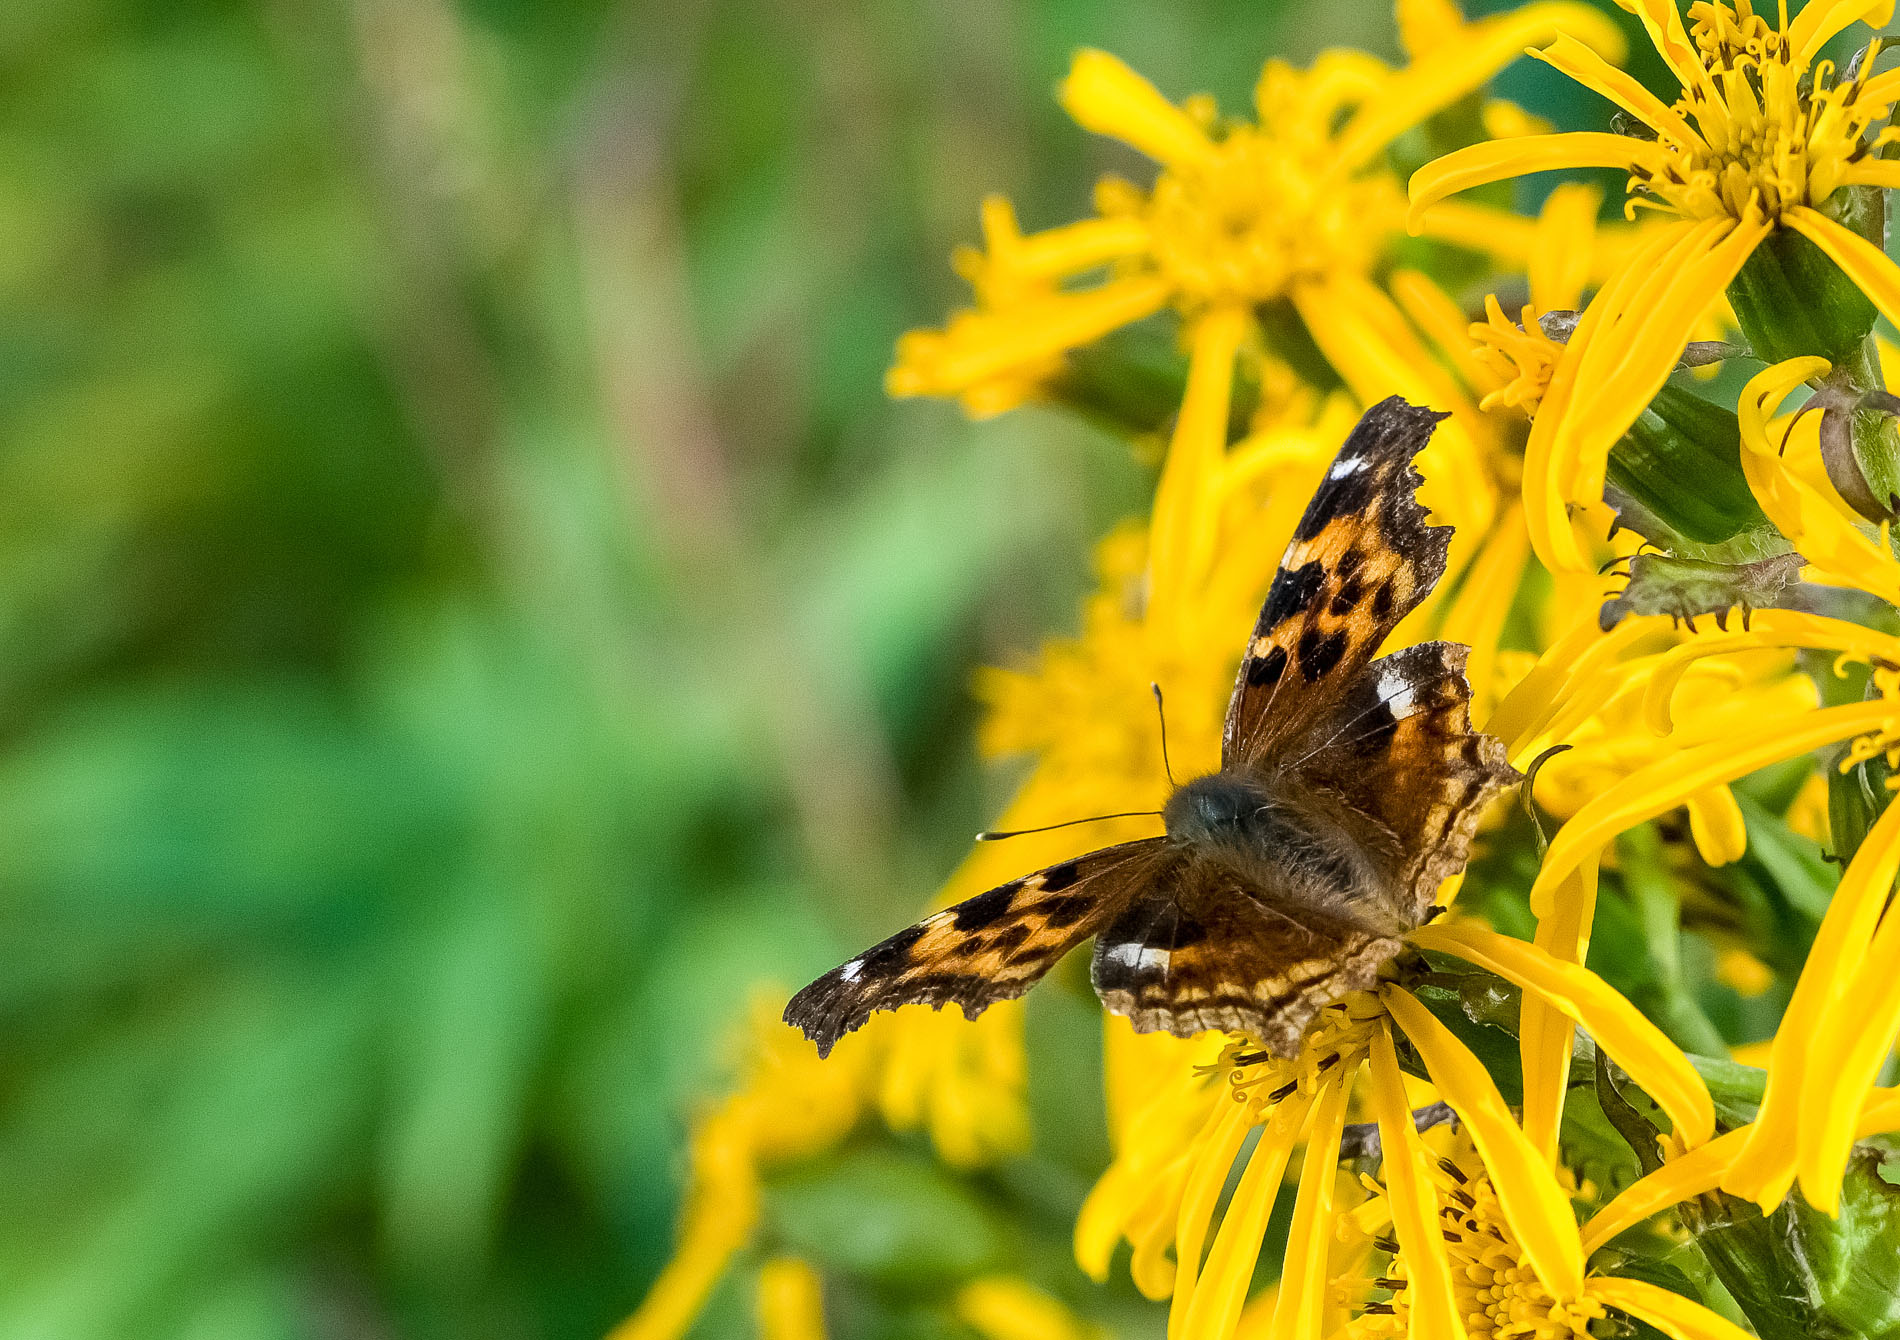 Explore Alaska butterflies in March at the UA Museum of the North.